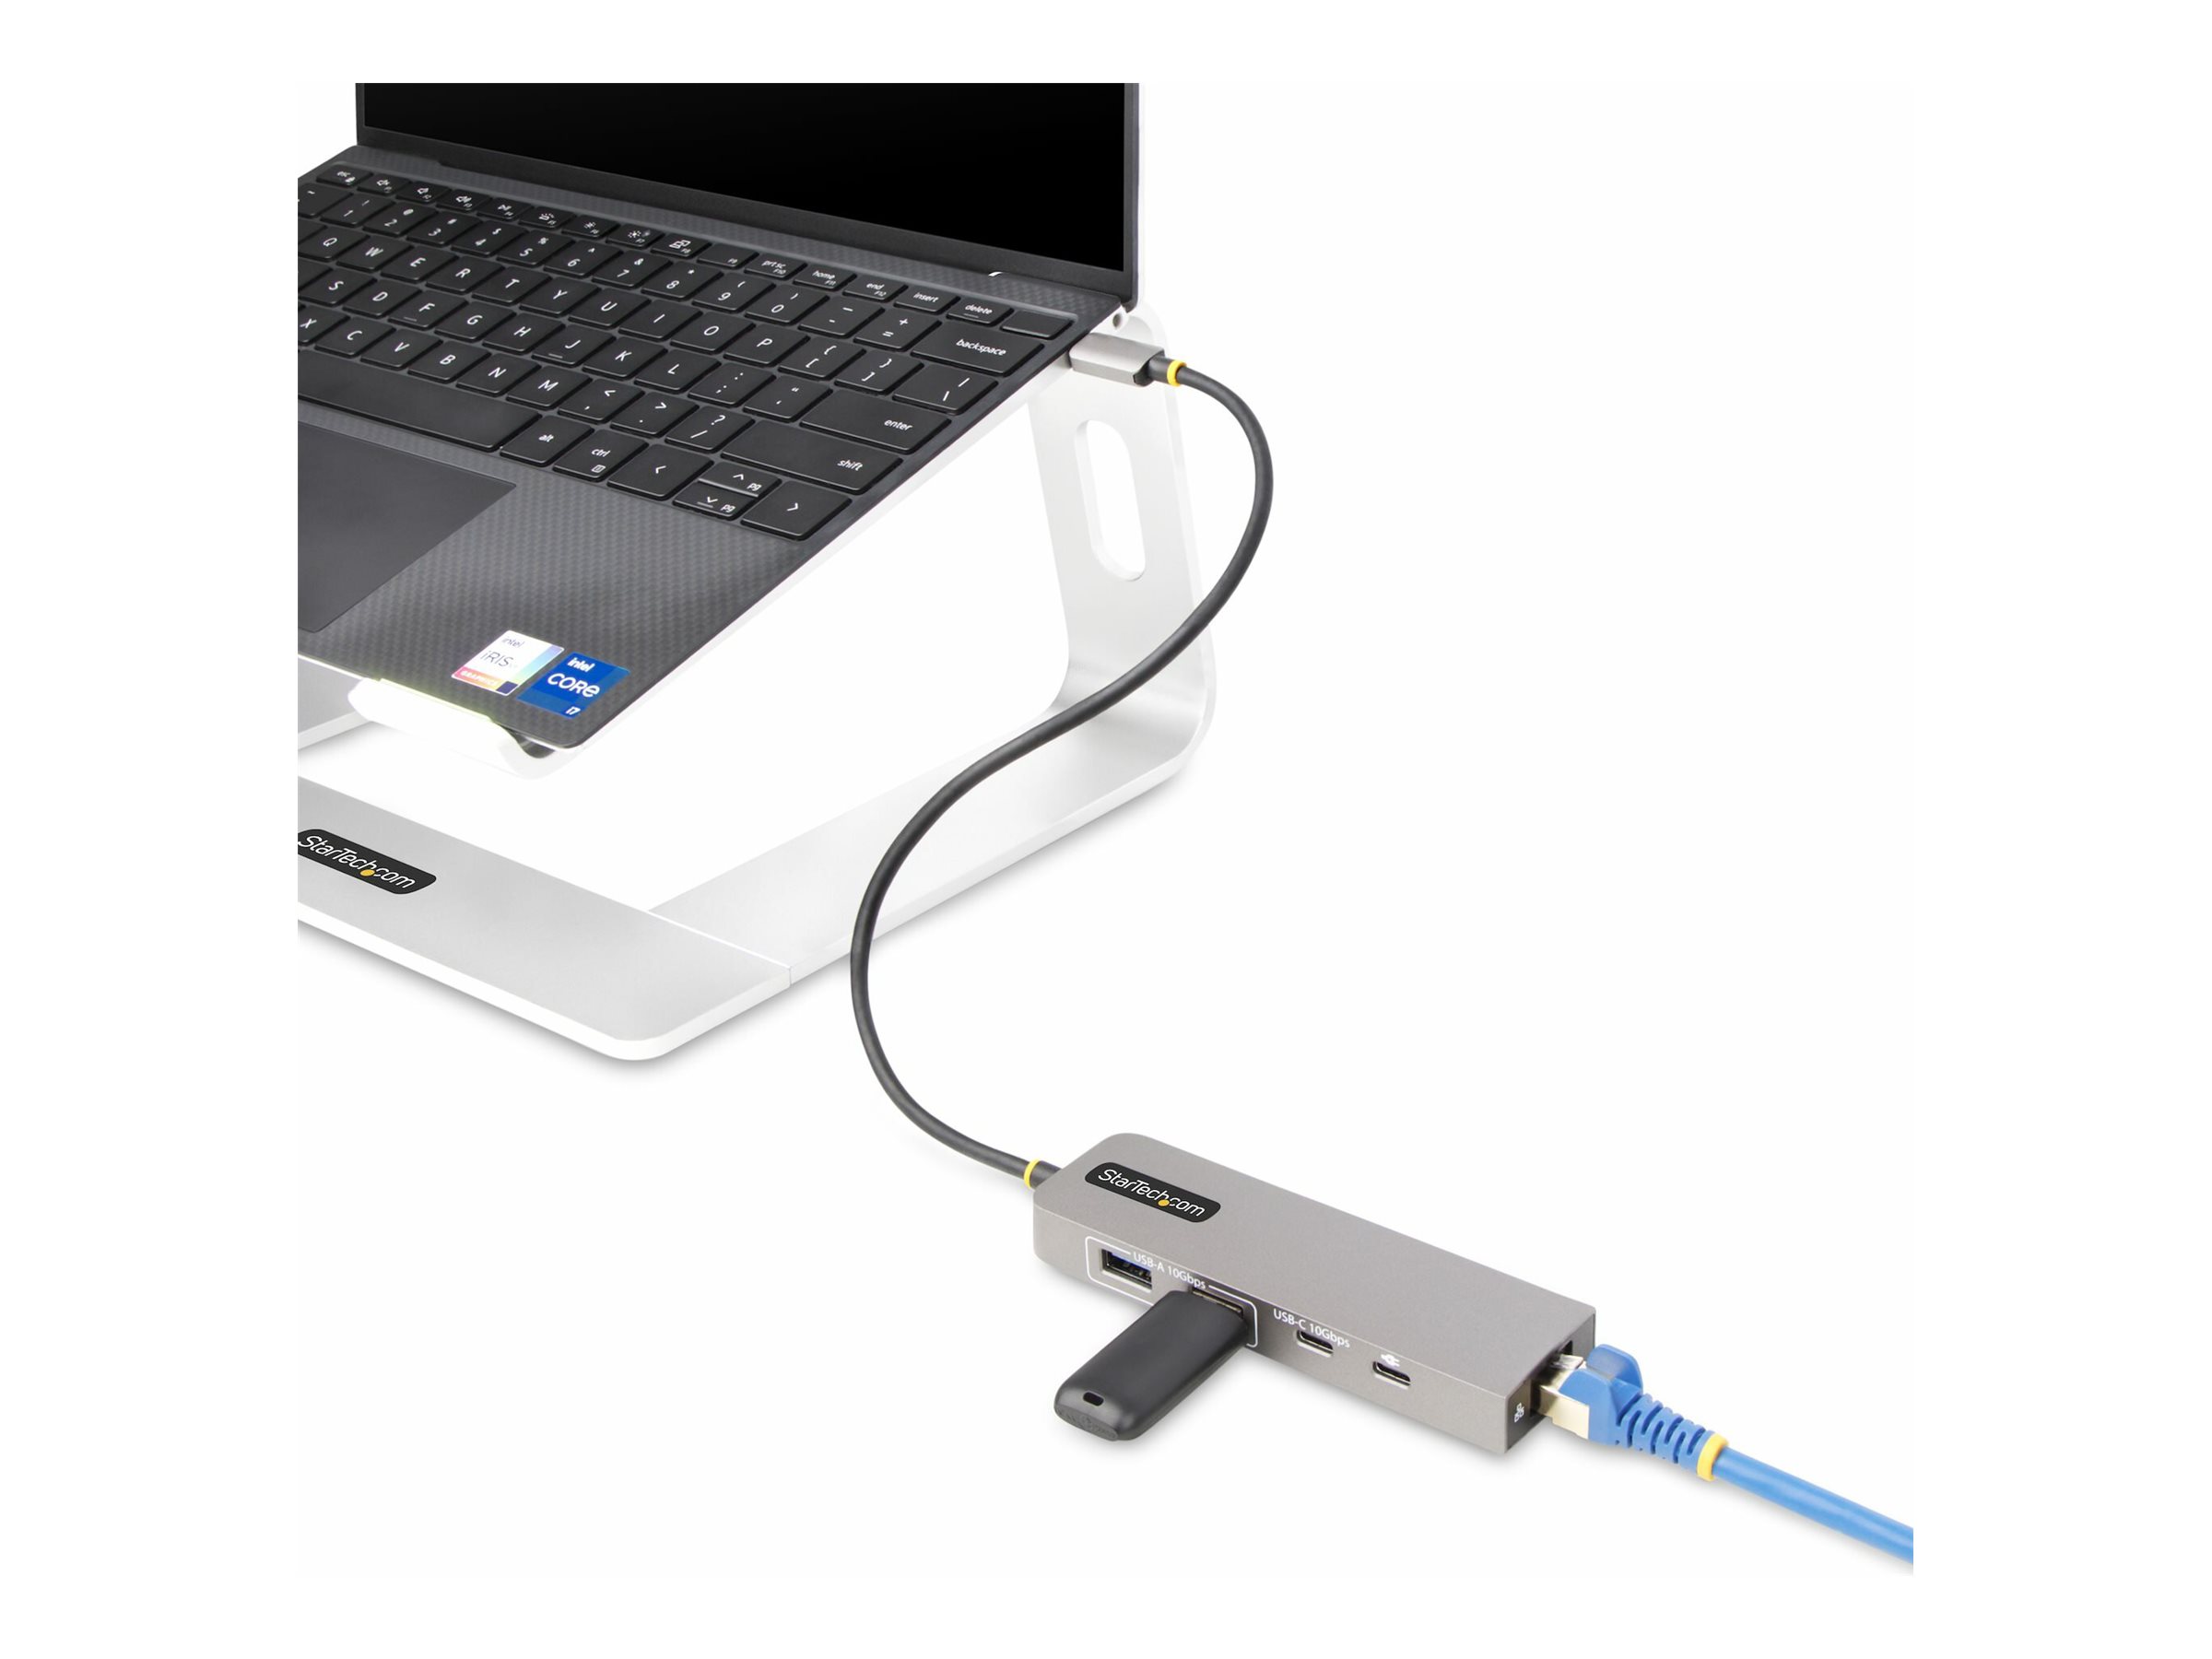 StarTech.com 3-Port USB-C Hub with 2.5 Gigabit Ethernet and 100W Power Delivery Passthrough Laptop Charging, USB-C to 2x USB-A/1